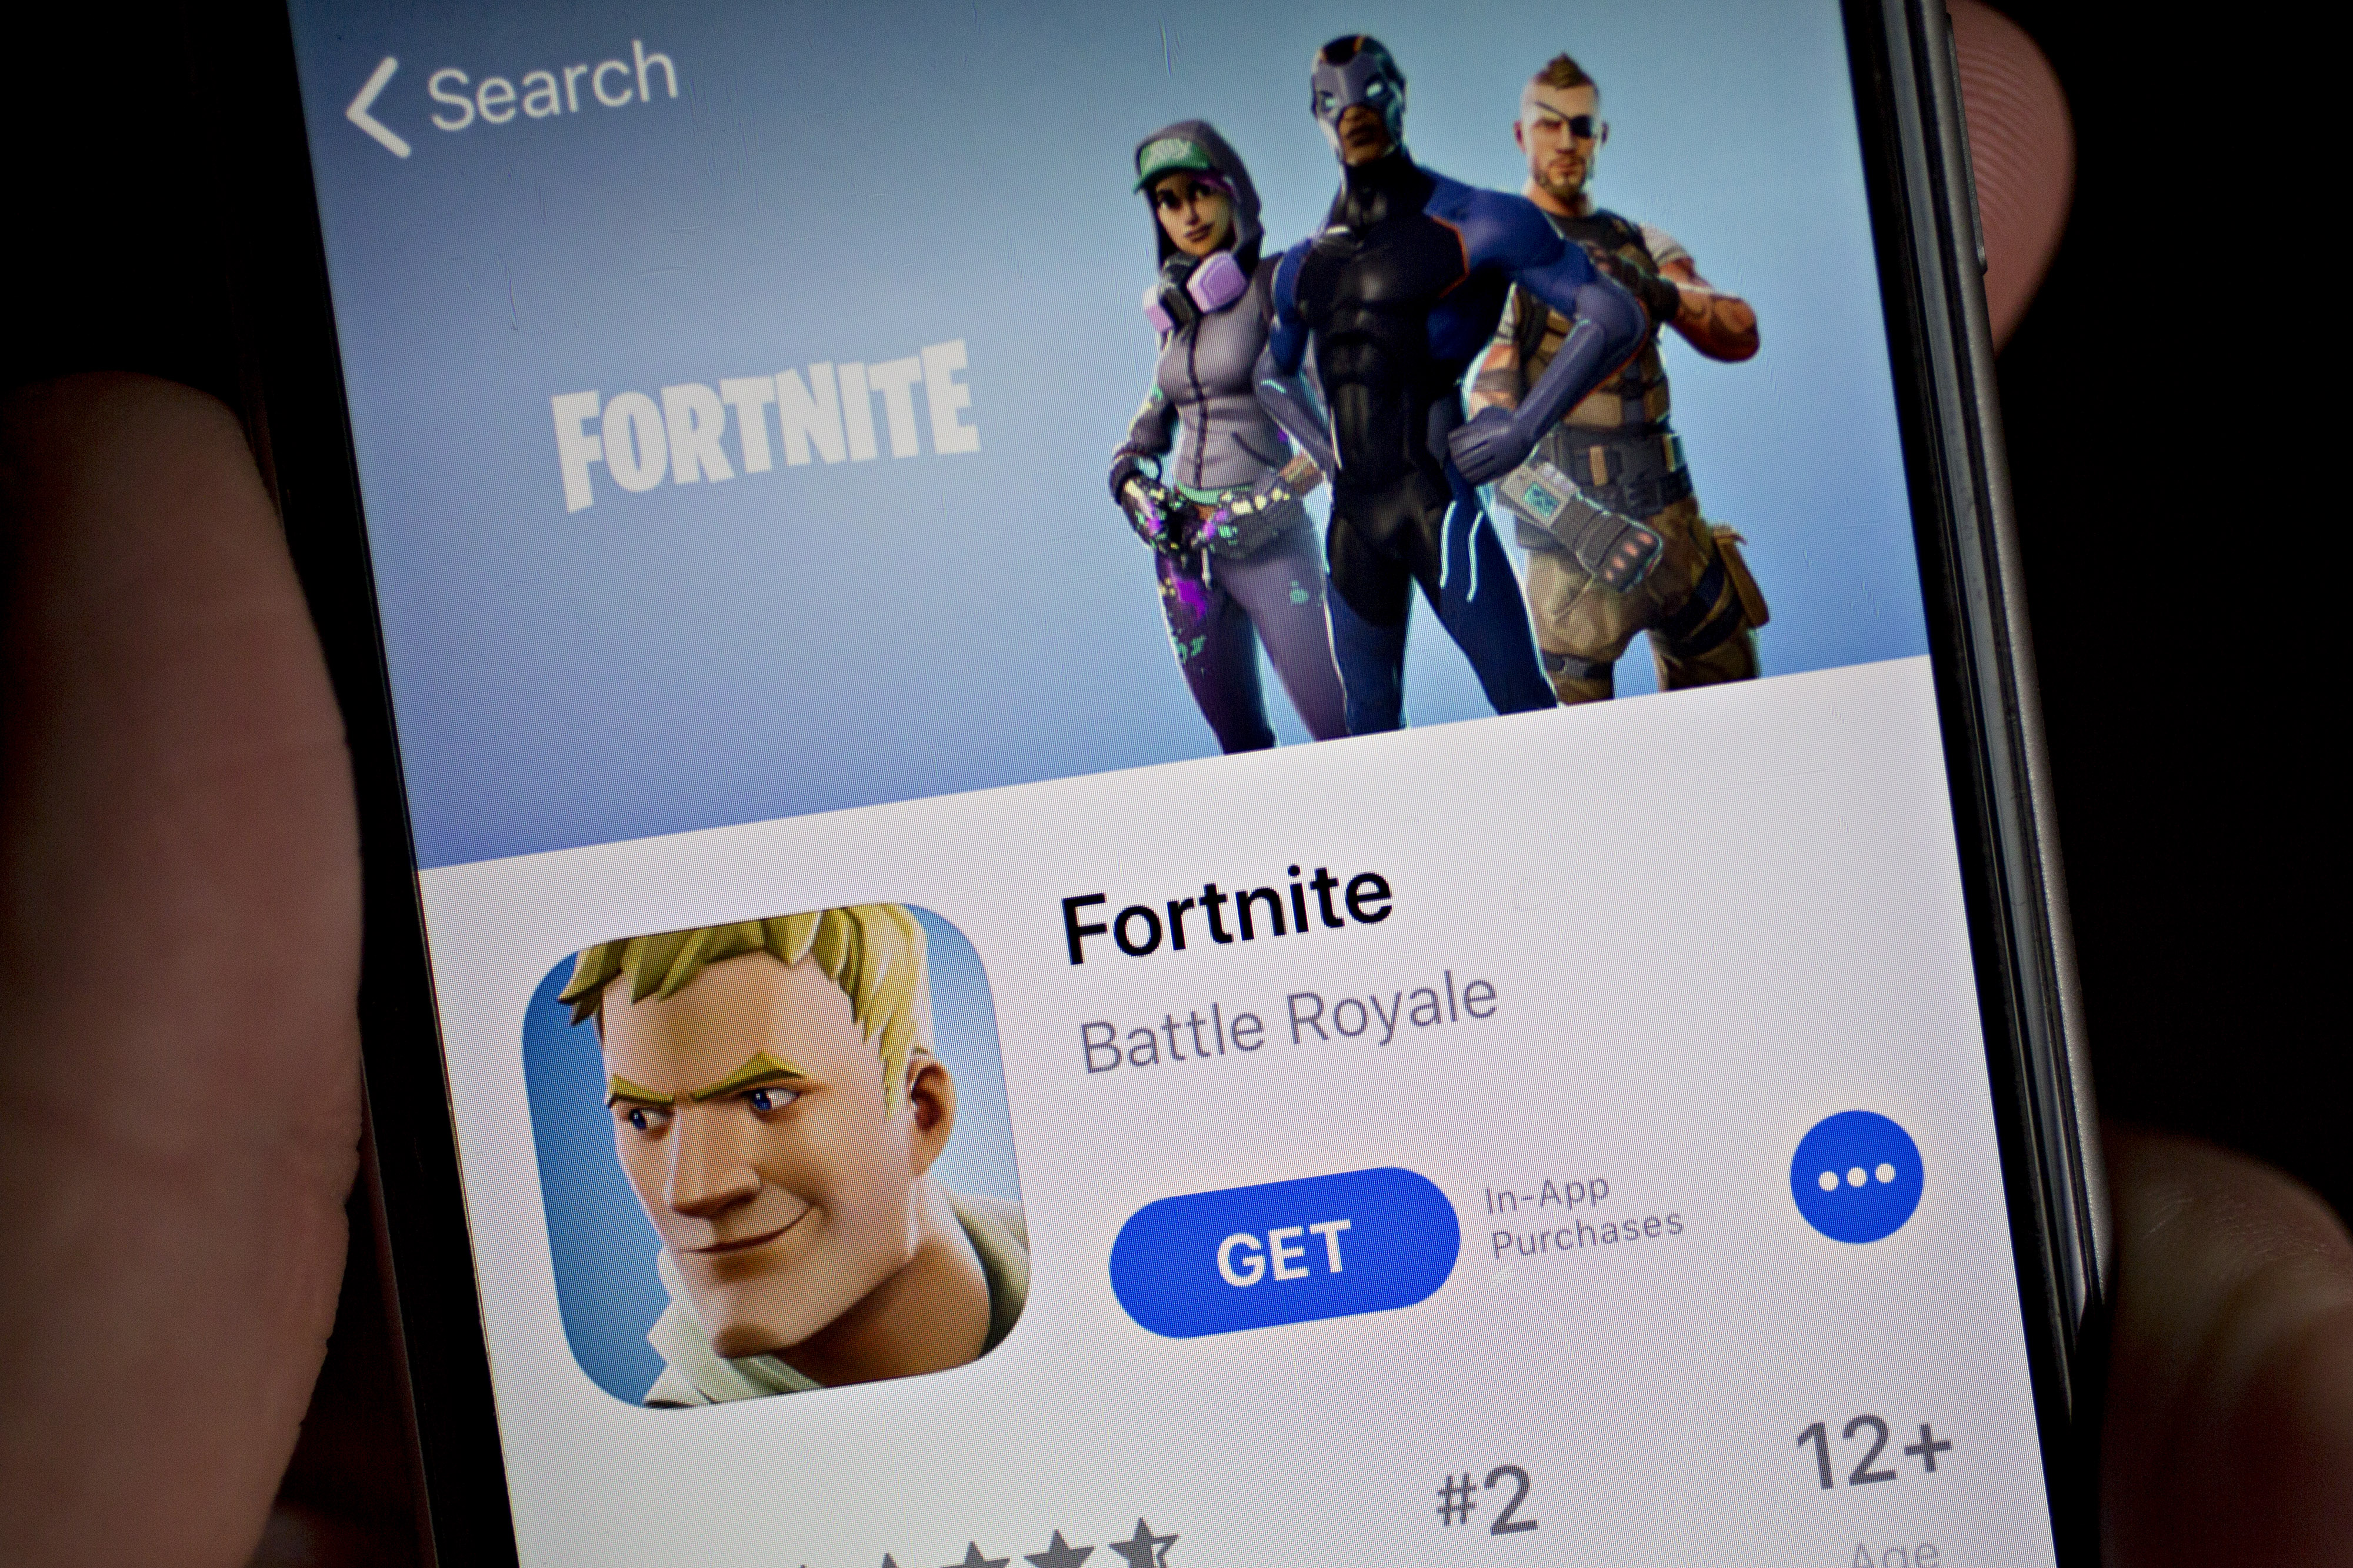 Does Fortnite Work Well On Iphone Epic Files Suit Against Apple After Fortnite Pulled From Ios App Store Updated Ars Technica